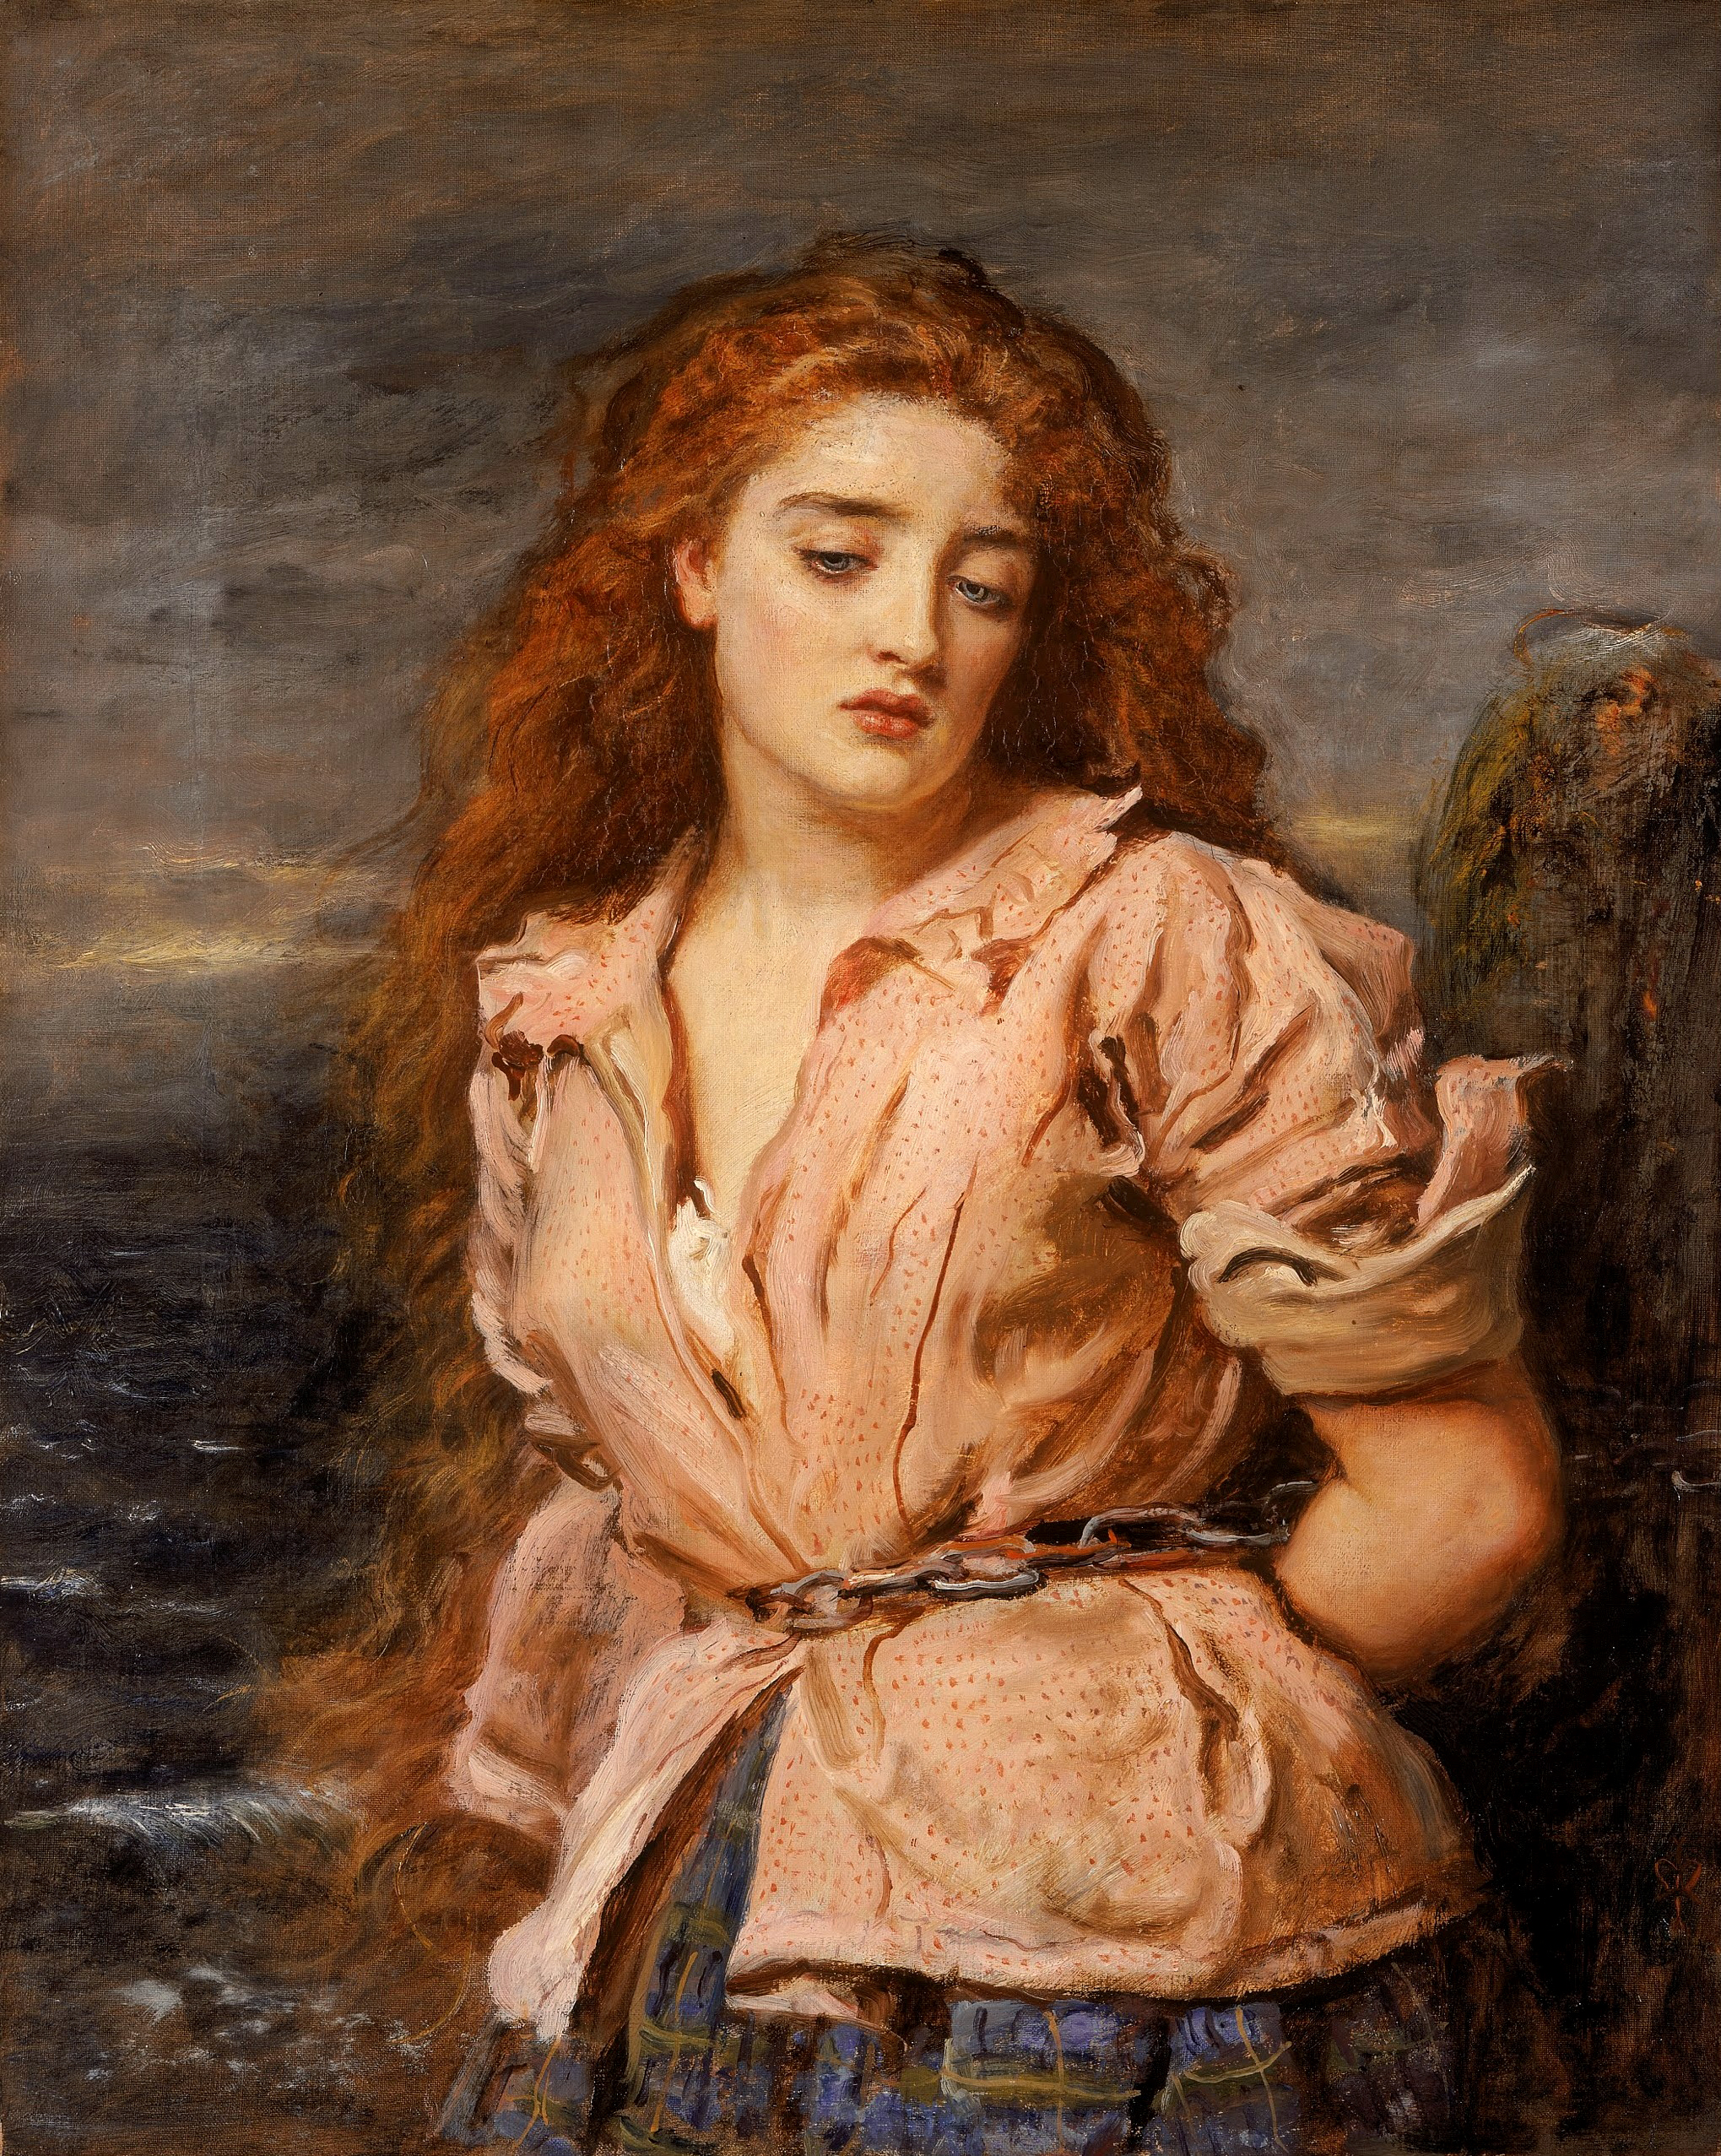 The Martyr of the Solway by John Everett Millais - 1871 - 56.5 x 70.5 cm Walker Art Gallery